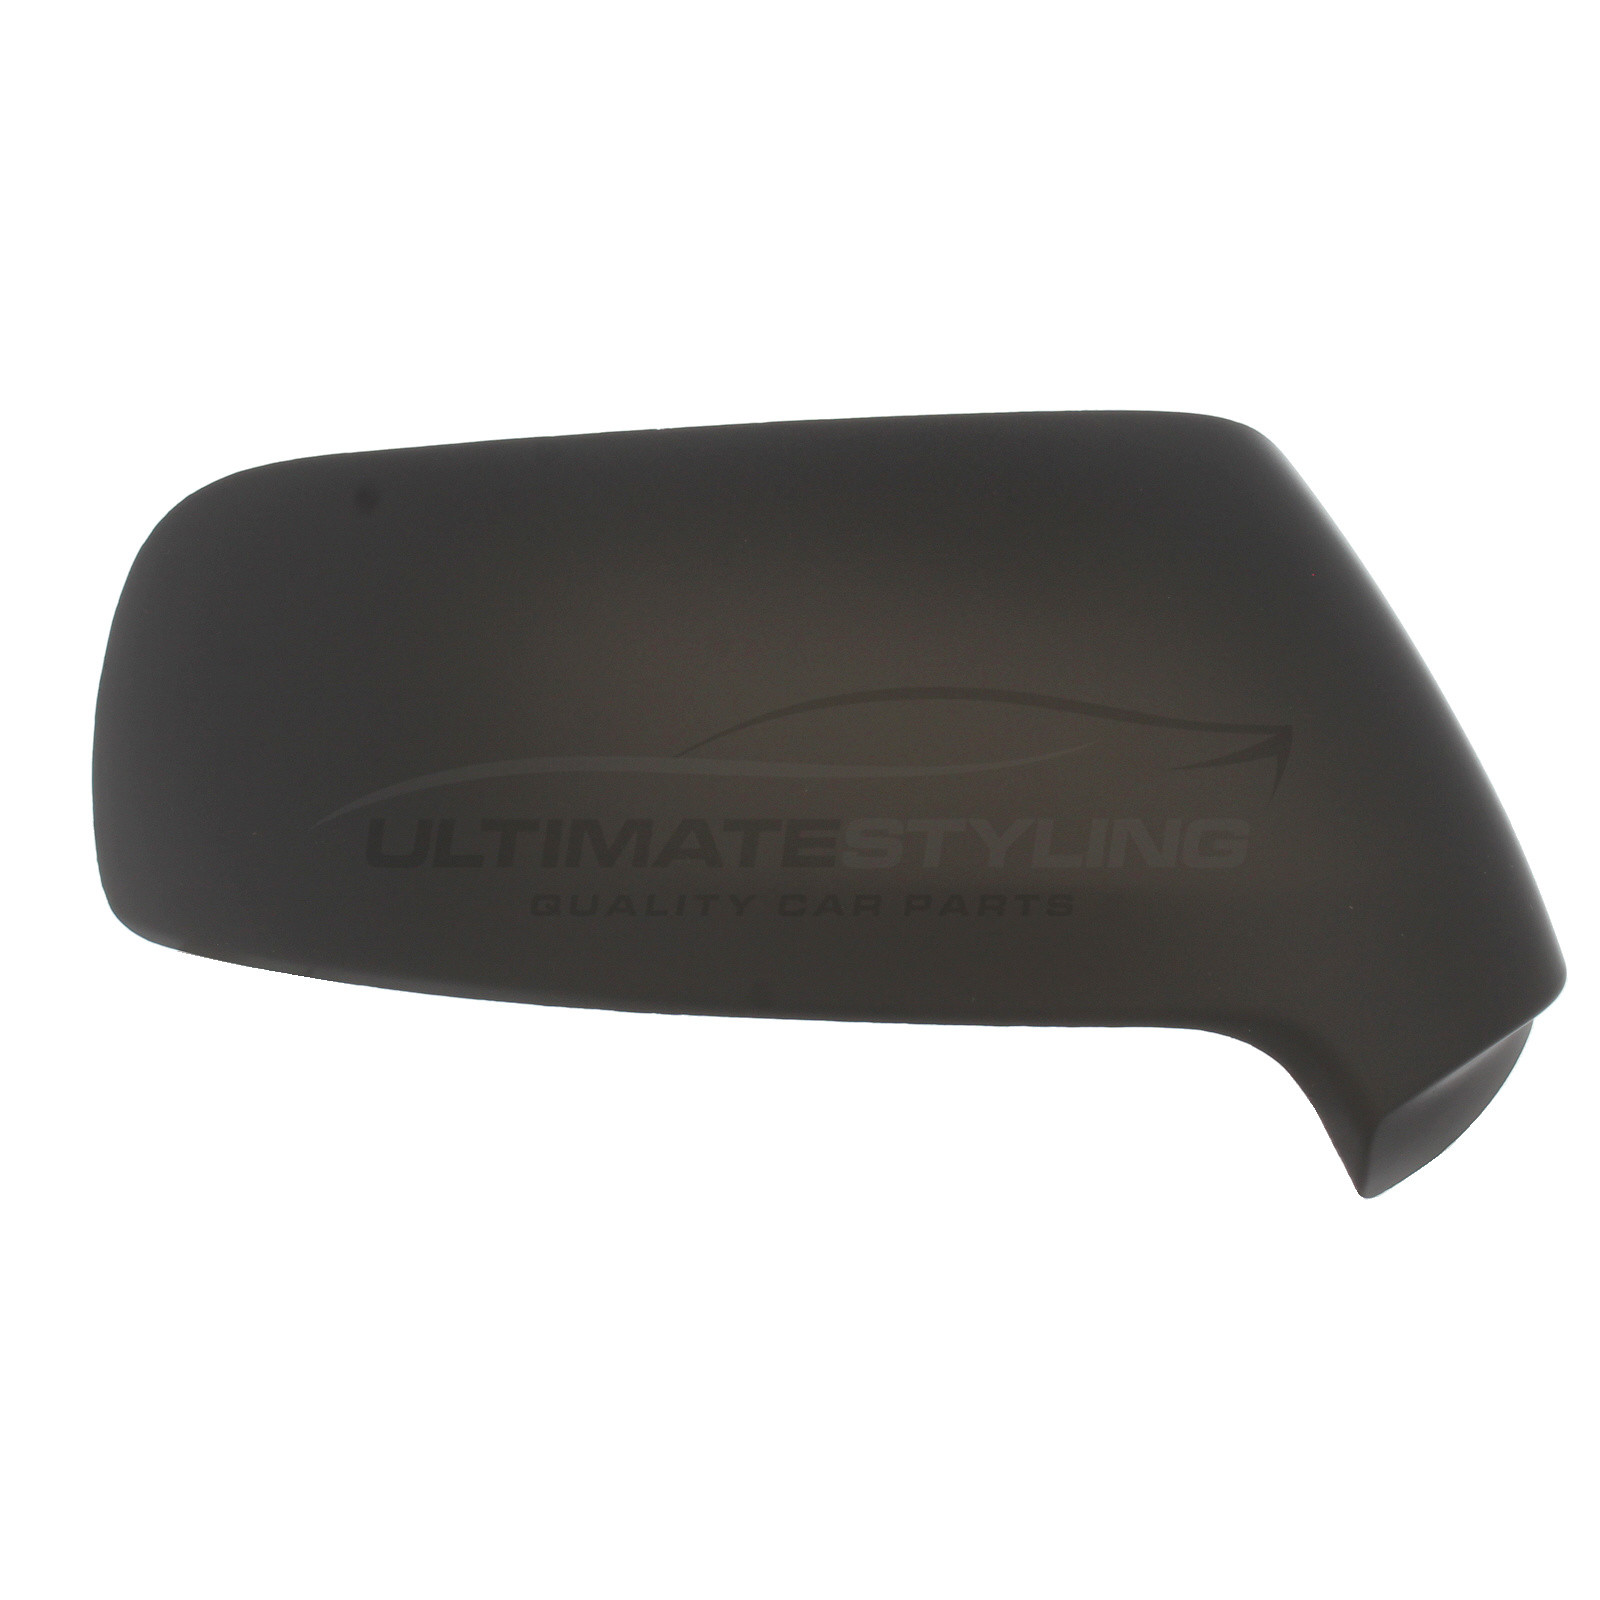 Citroen C3 Picasso 2009-2018, Citroen C4 Grand Picasso 2006-2014, Citroen C4 Picasso 2006-2013, Peugeot 3008 2009-2017, Peugeot 5008 2010-2018 Wing Mirror Cover Cap Casing Black (Textured) Drivers Side (RH)